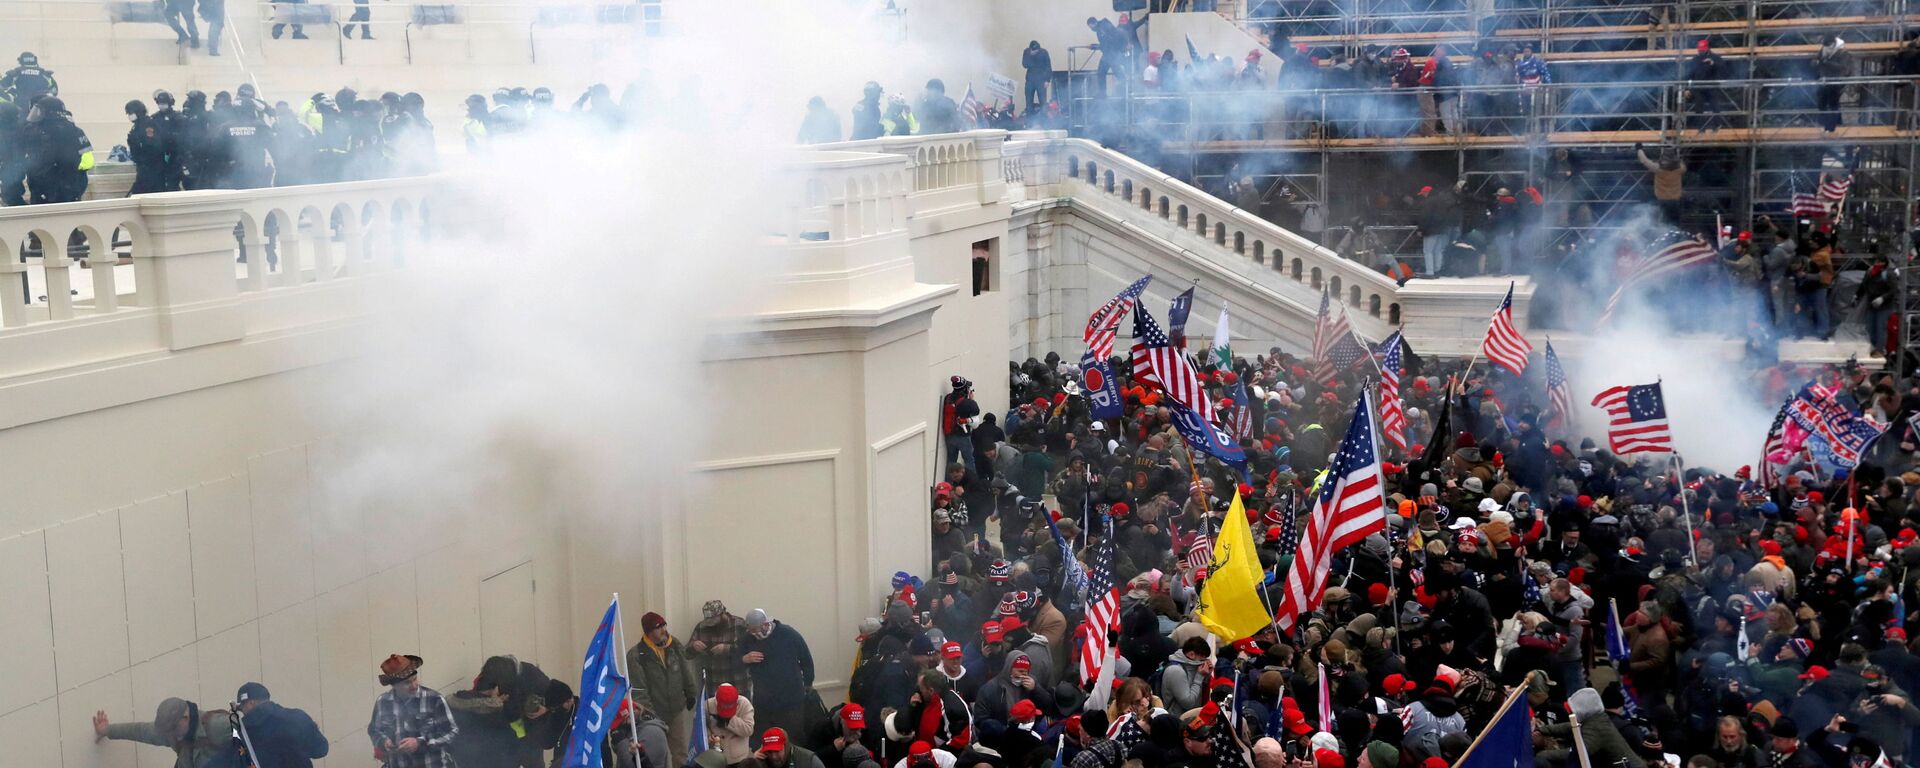 Police release tear gas into a crowd of pro-Trump protesters during clashes at a rally to contest the certification of the 2020 U.S. presidential election results by the U.S. Congress, at the U.S. Capitol Building in Washington, U.S, January 6, 2021. - Sputnik International, 1920, 12.09.2021